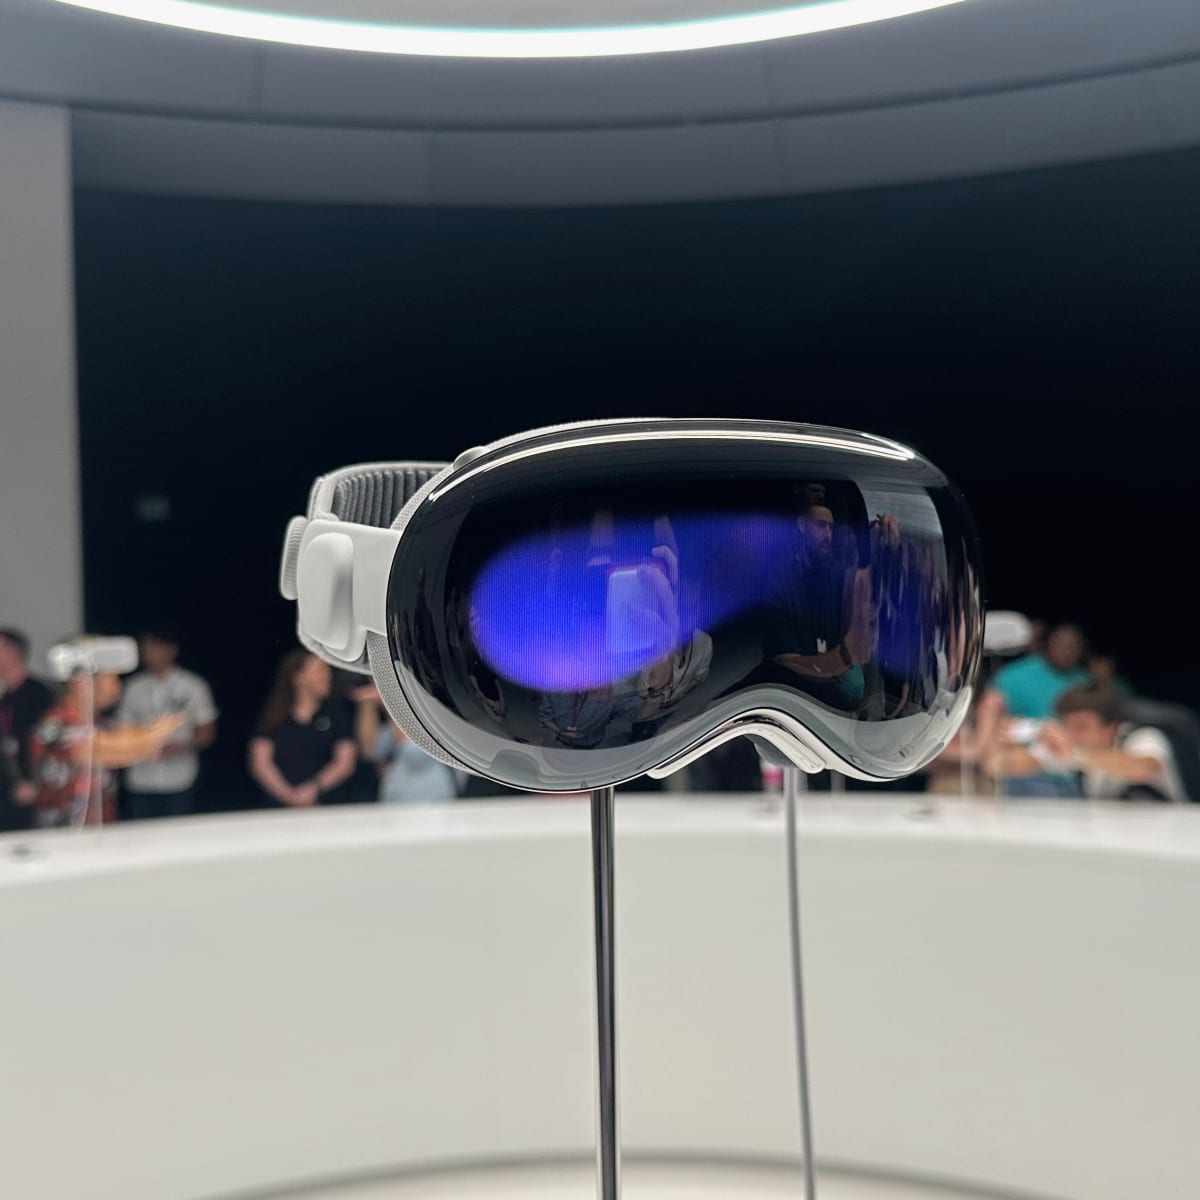 Xreal Announces Air 2 Ultra AR Glasses Ahead of Apple Vision Pro Launch